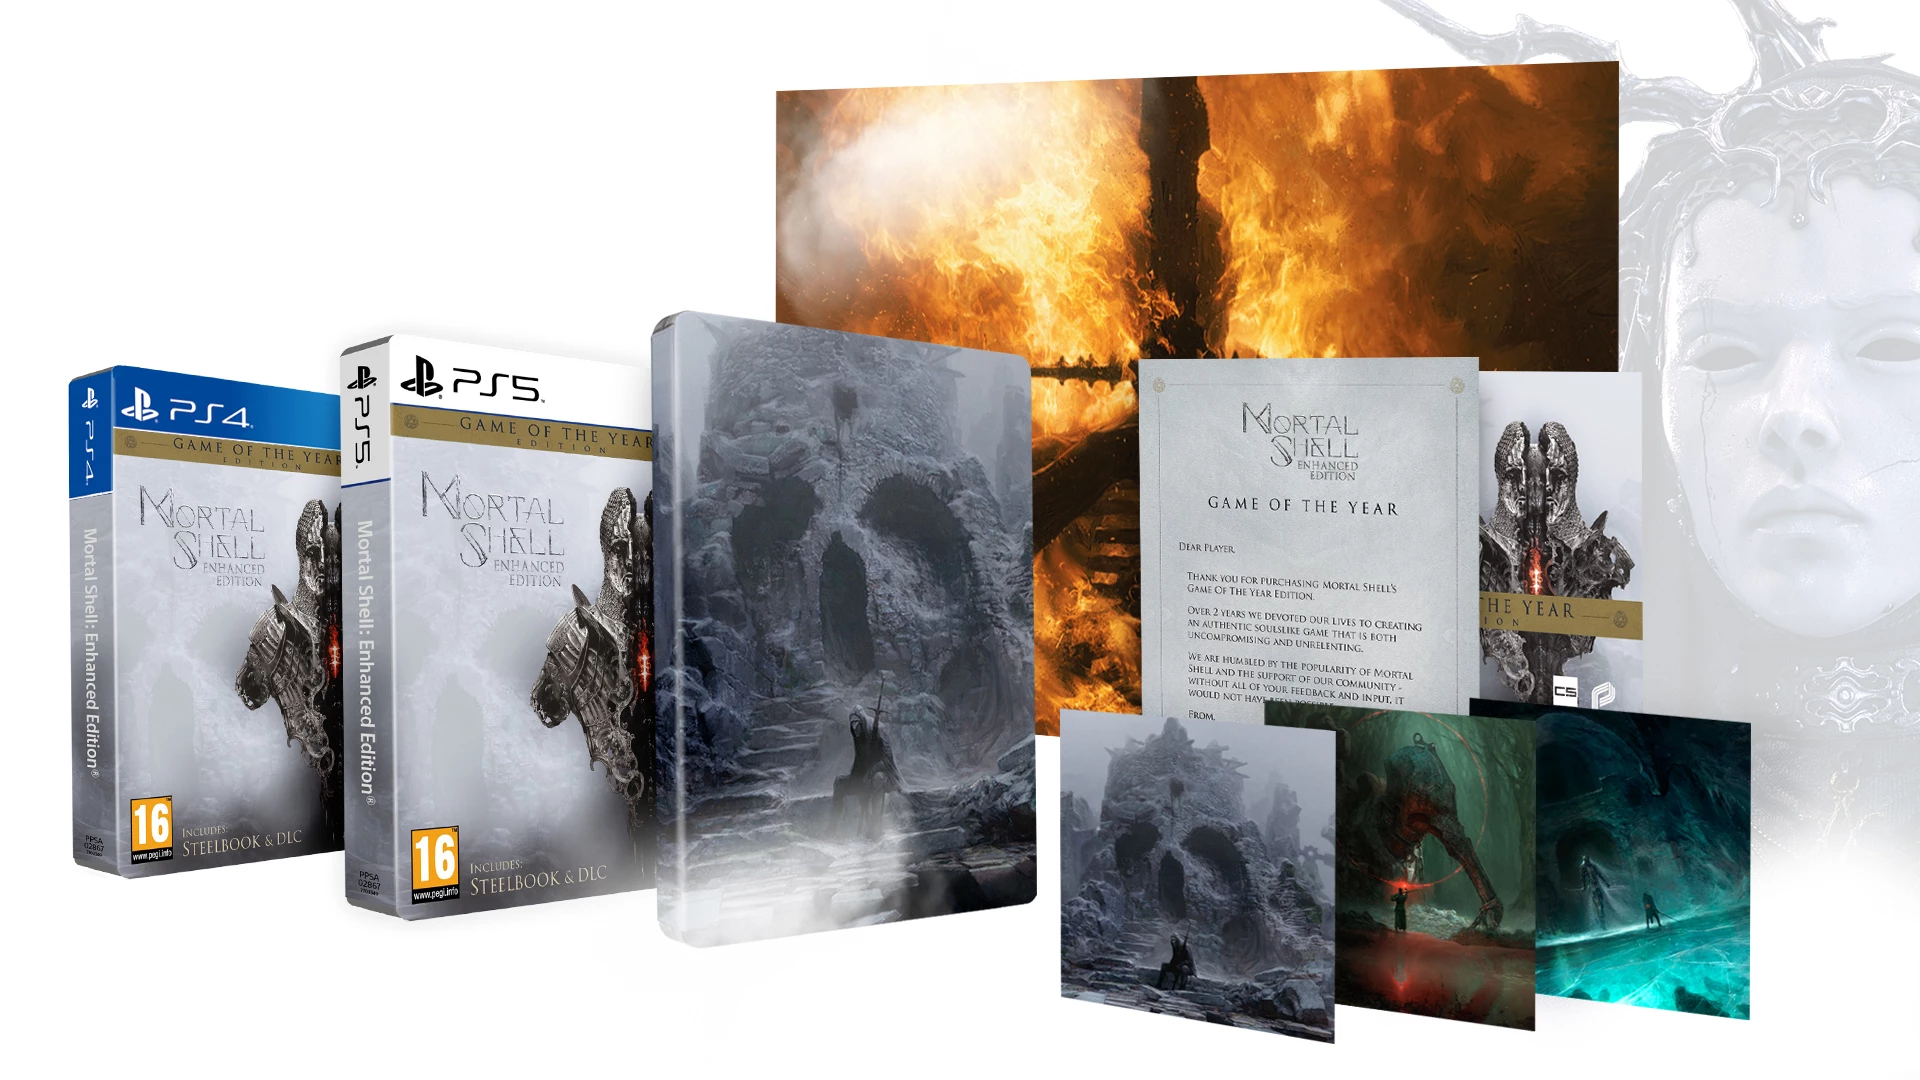 Mortal Shell - Game of the Year Steelbook Edition (PS4), Playstack